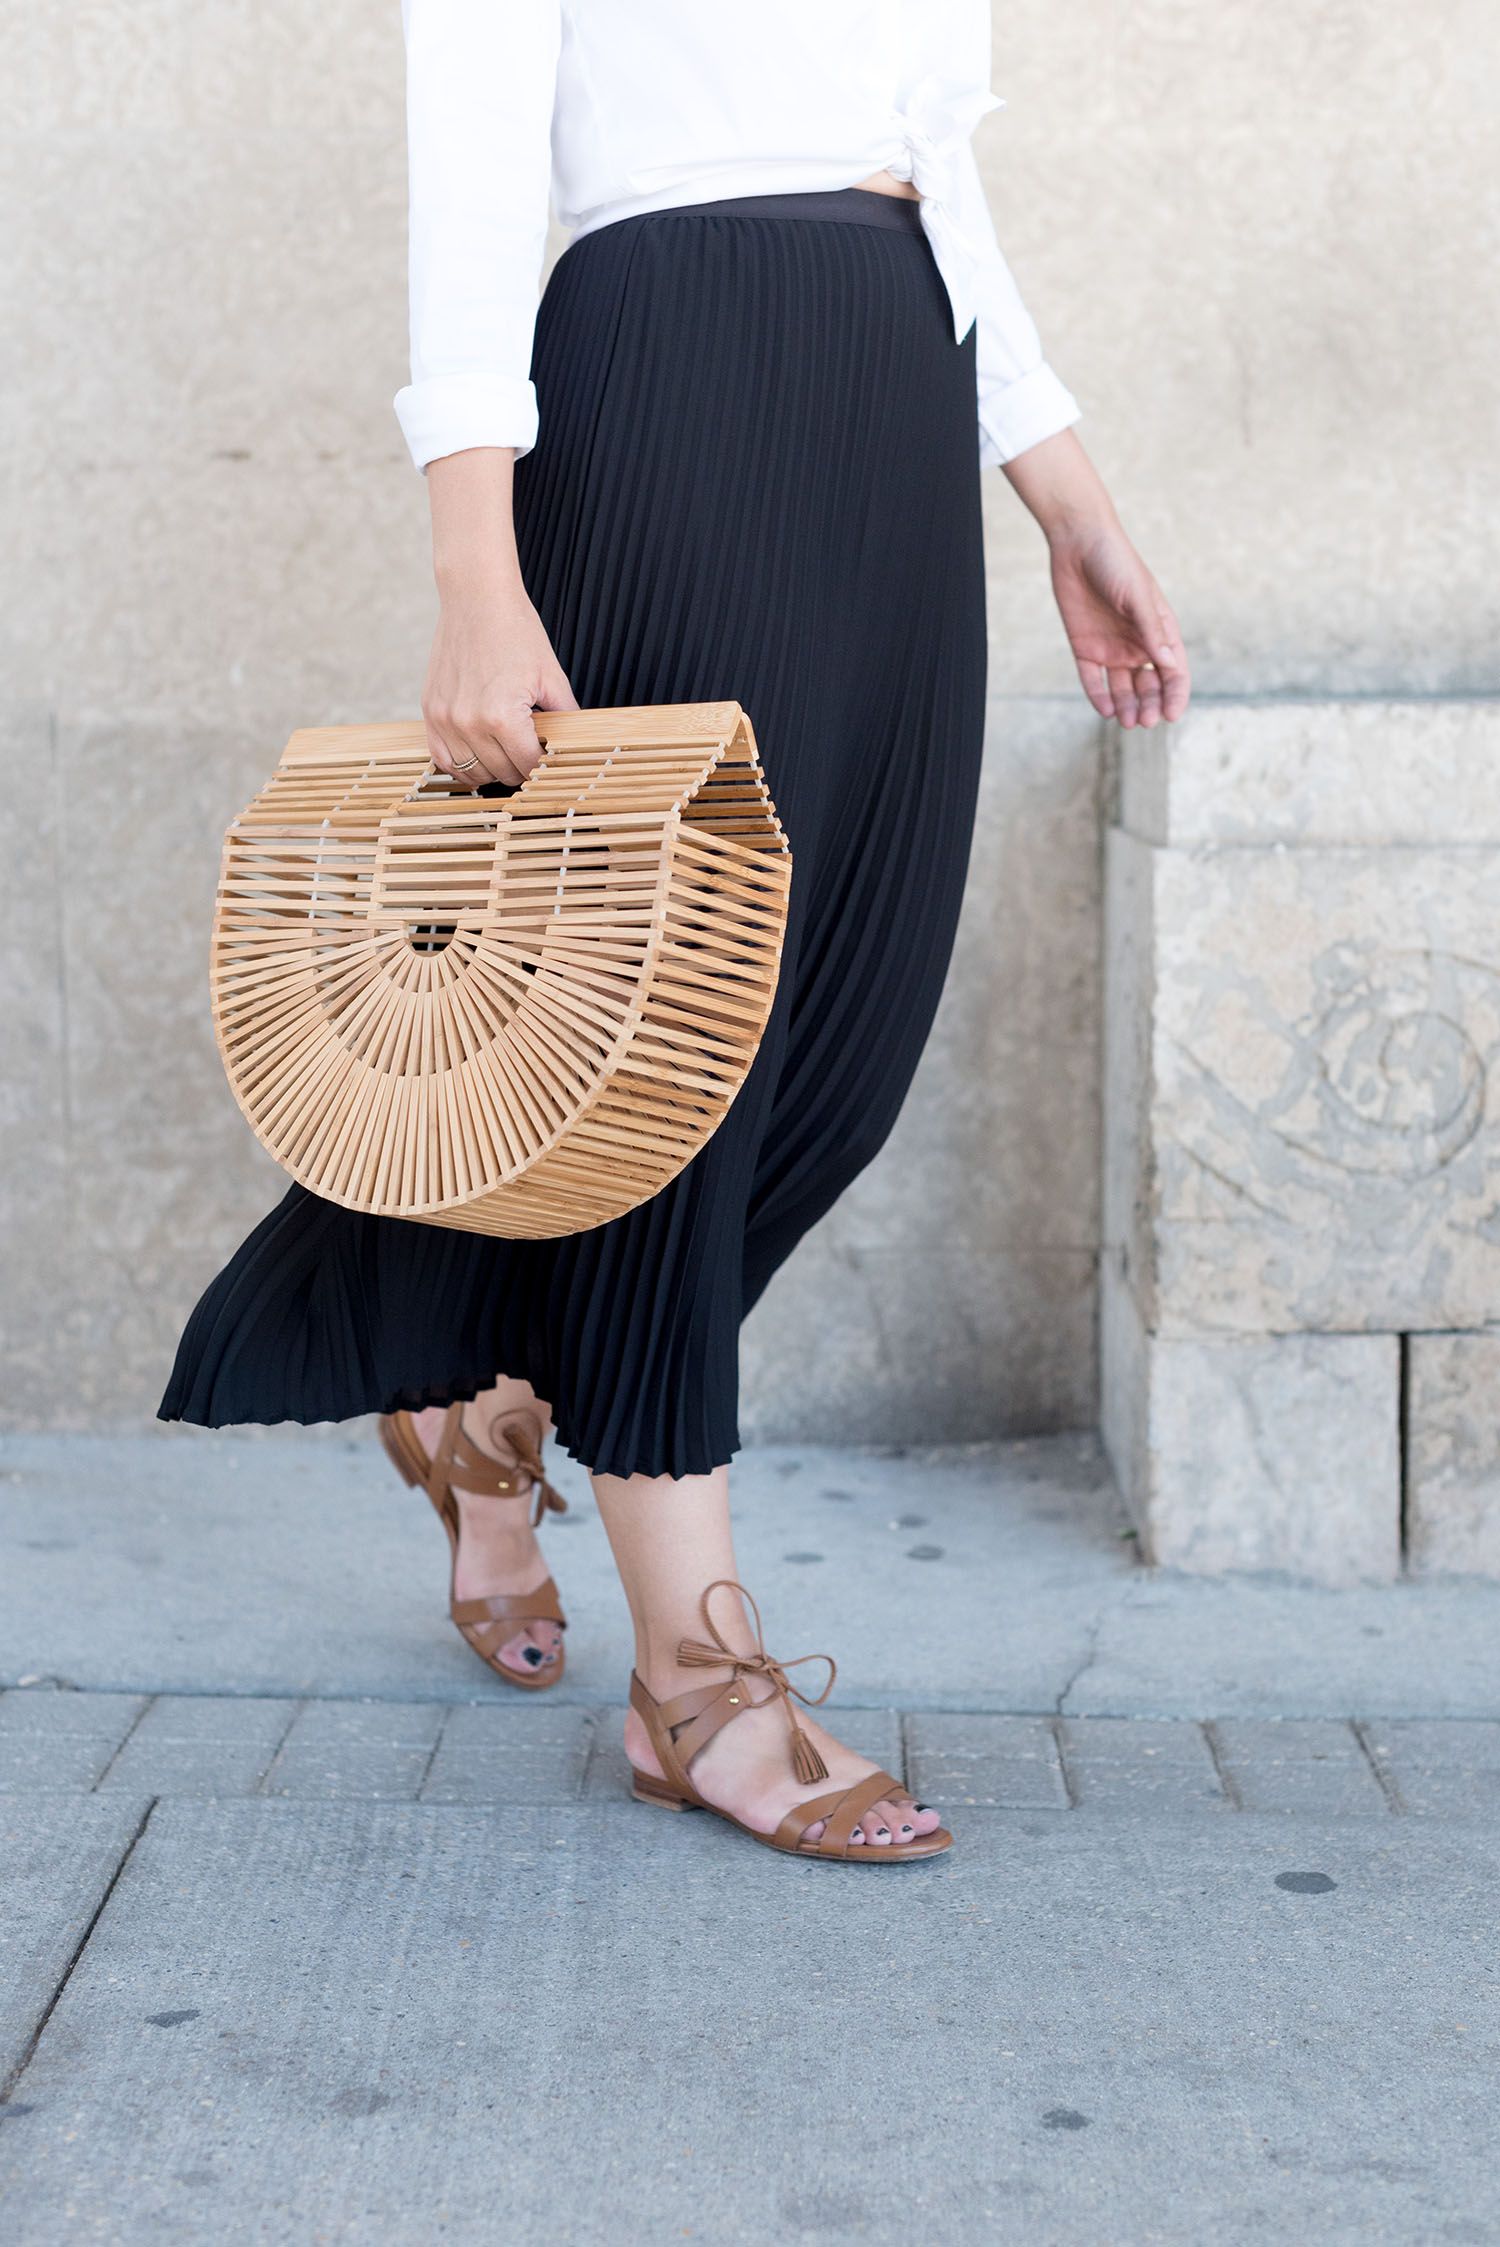 Outfit details on top Canadian fashion blogger Cee Fardoe of Coco & Vera, including Sezane sandals and a vintage cage bag